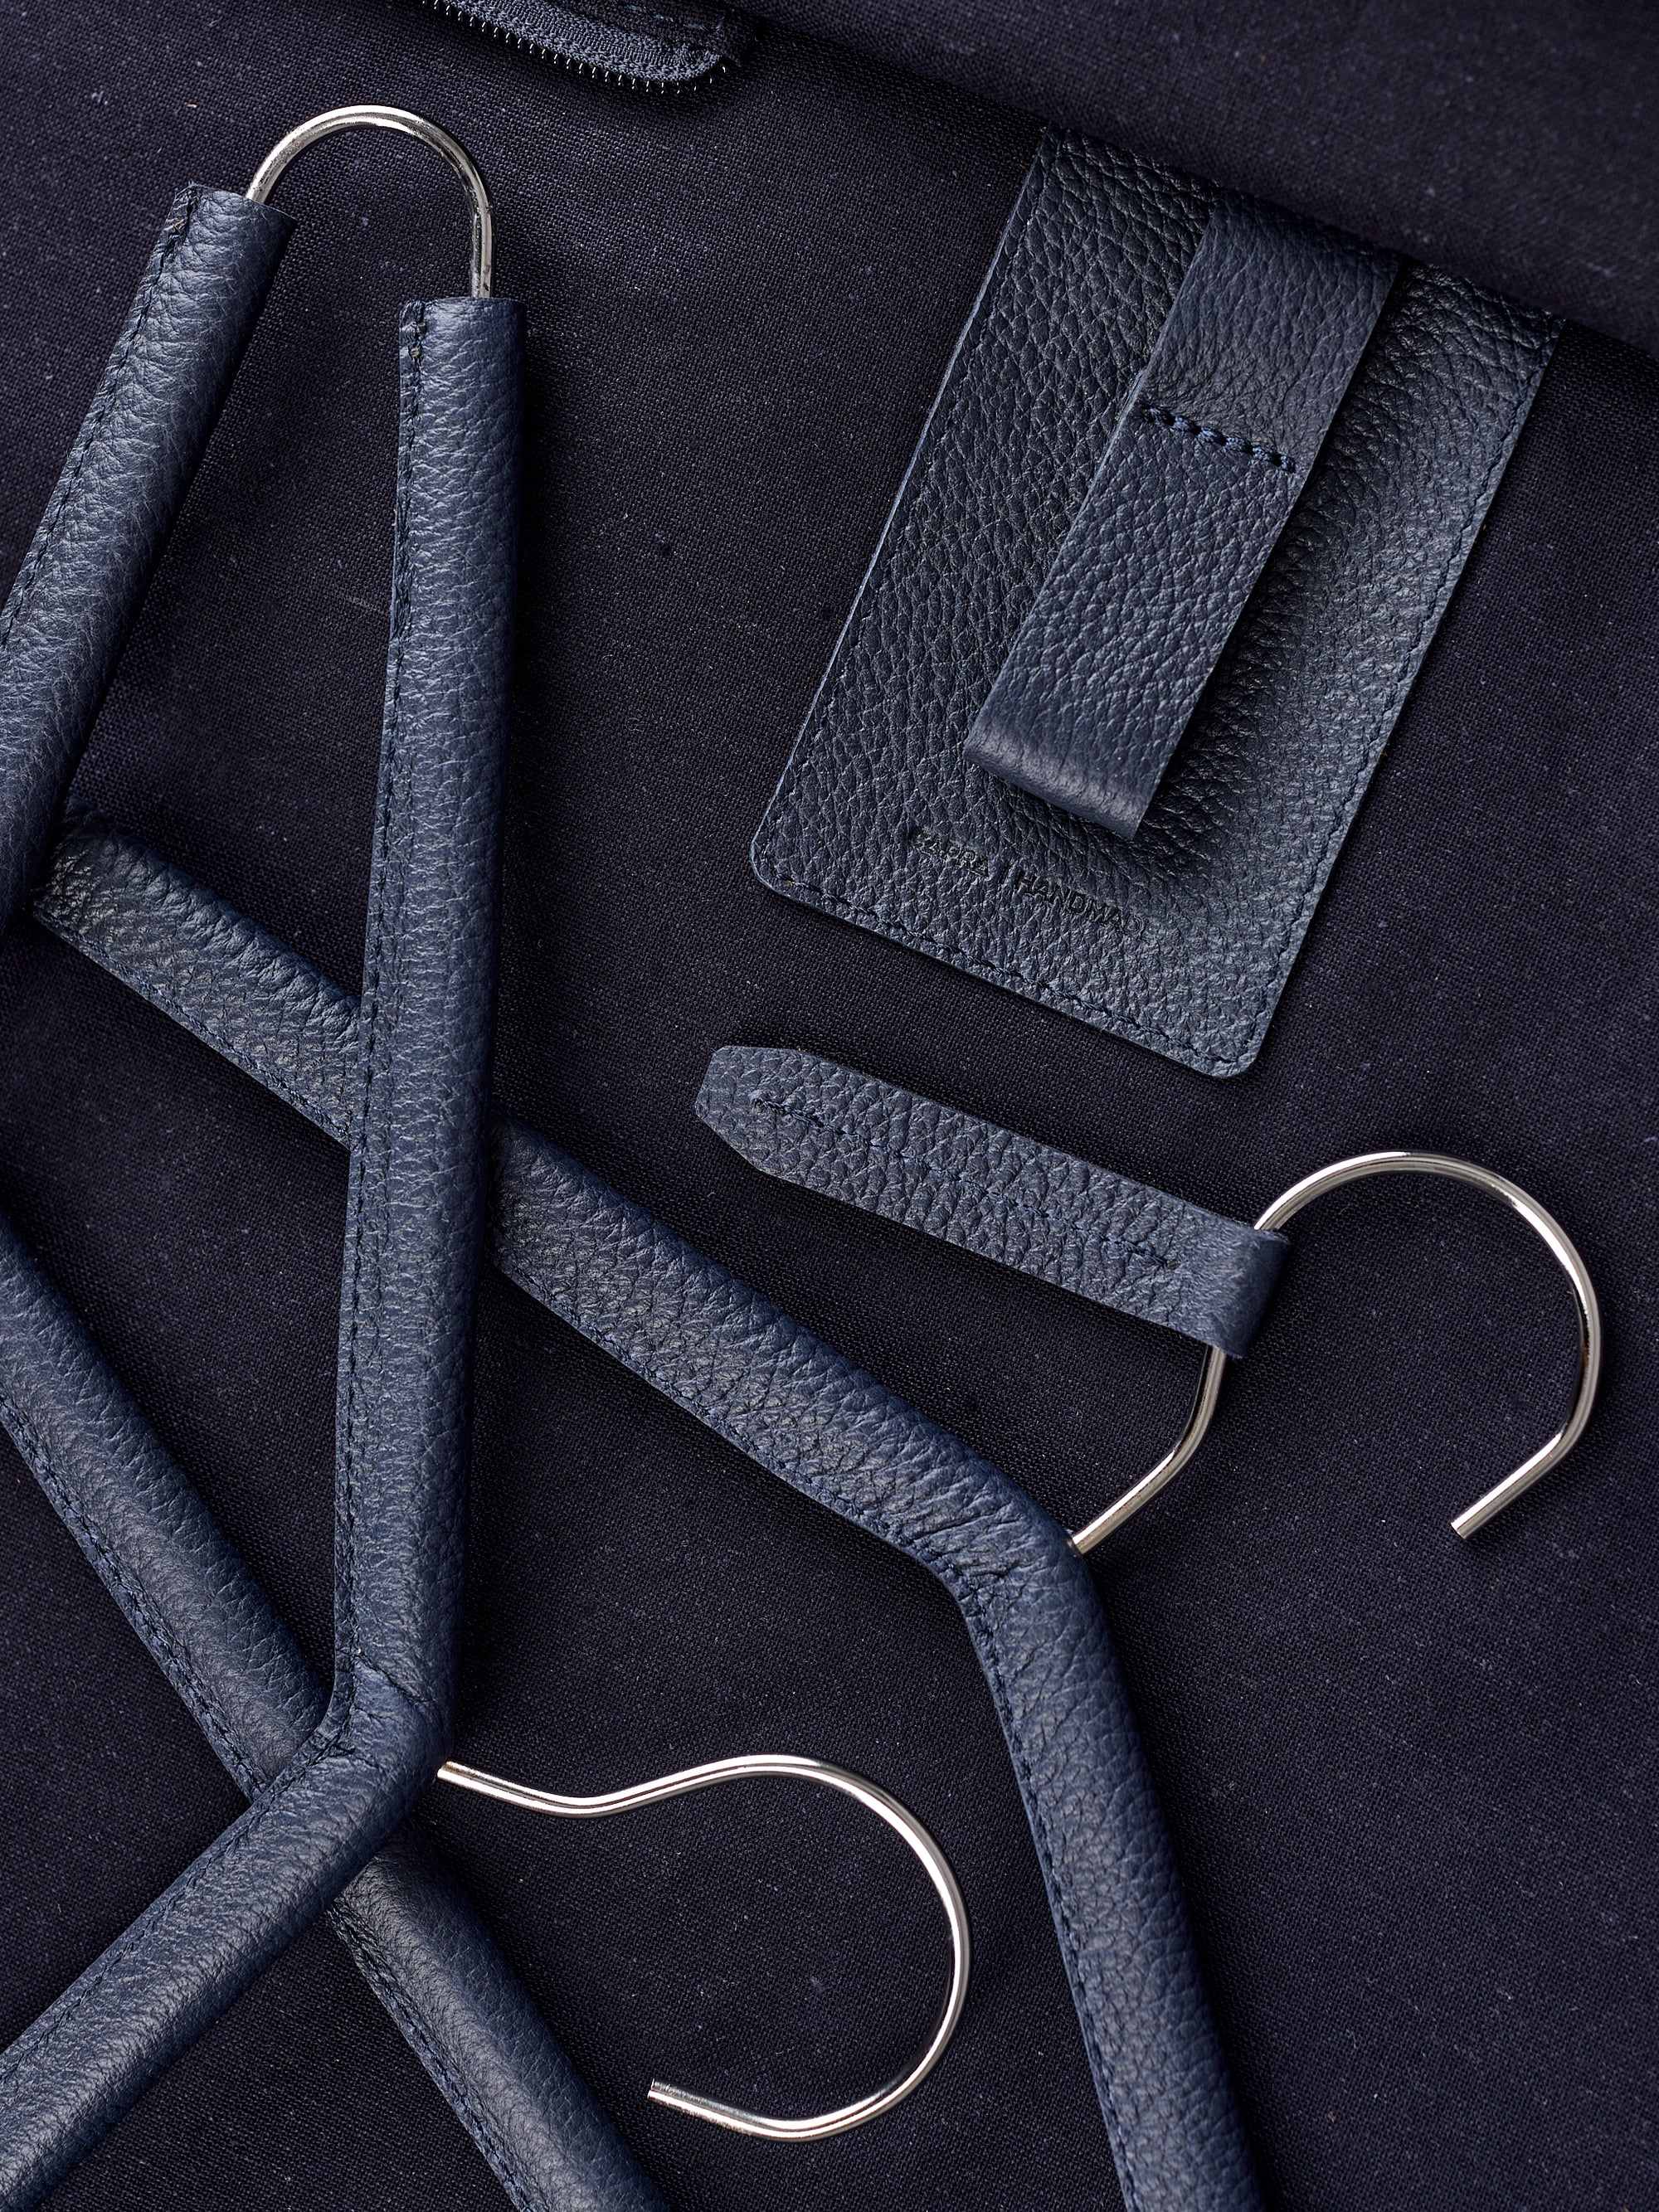 Leather Clothing Hangers. Travel Suit Bag Navy by Capra